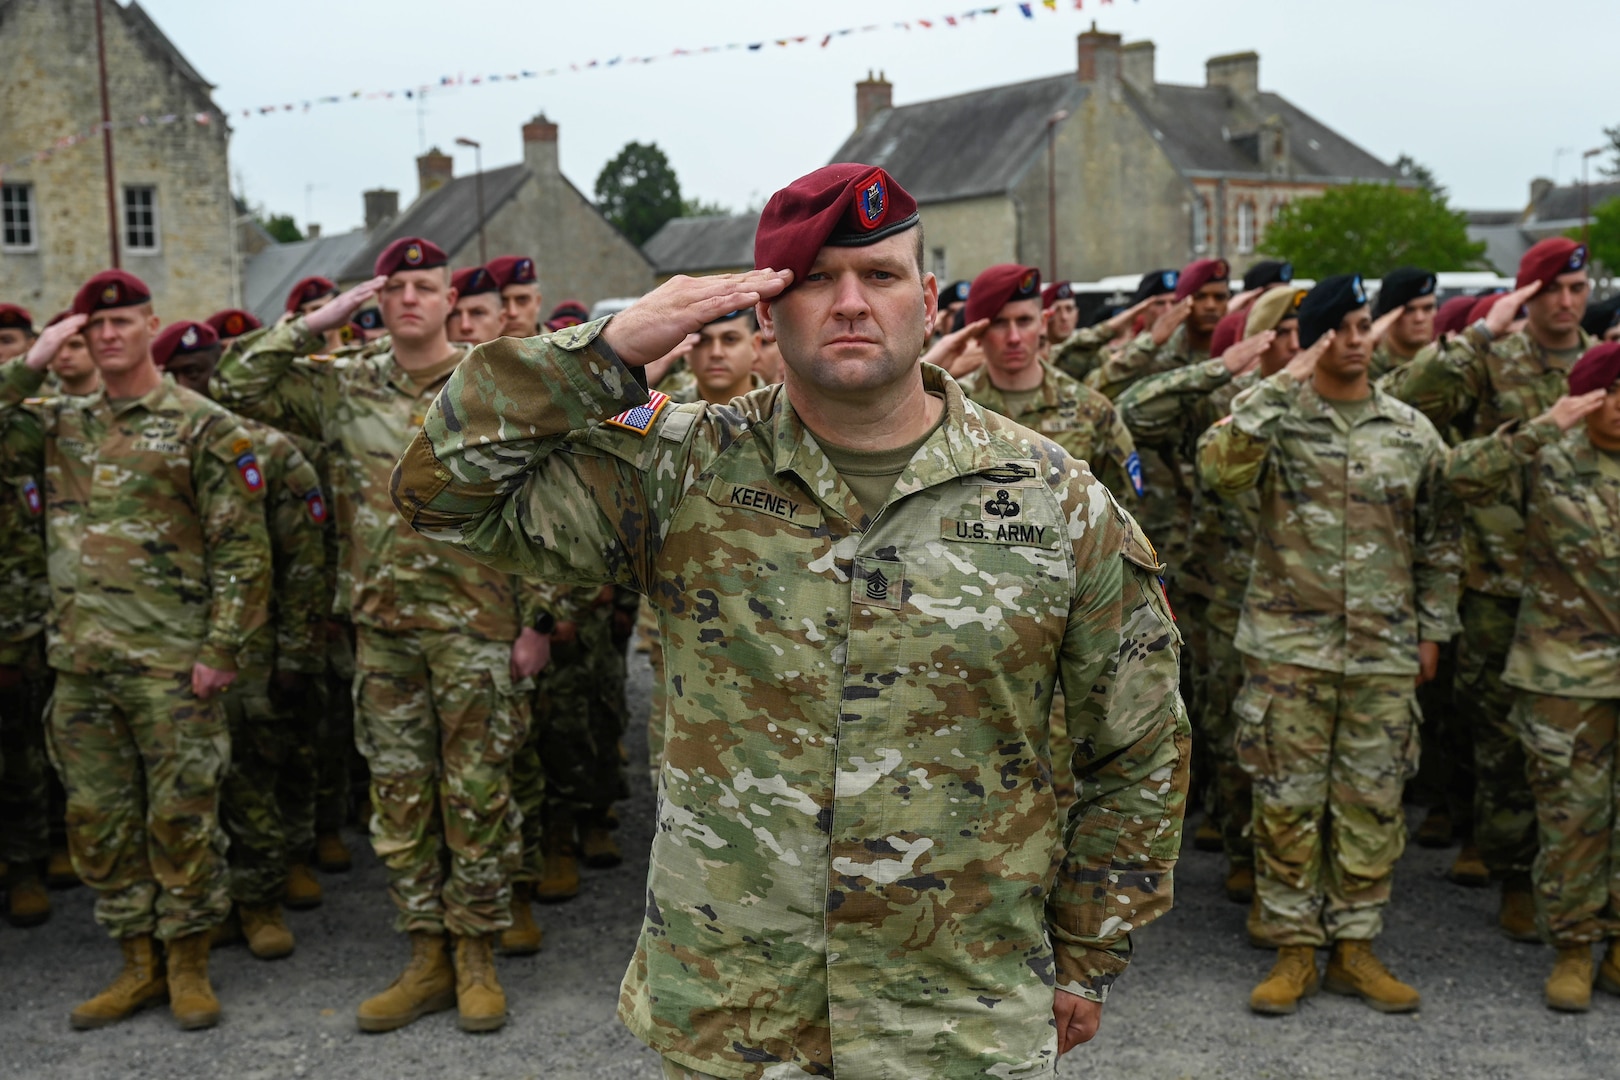 : Soldiers in uniform salute while standing in formation.